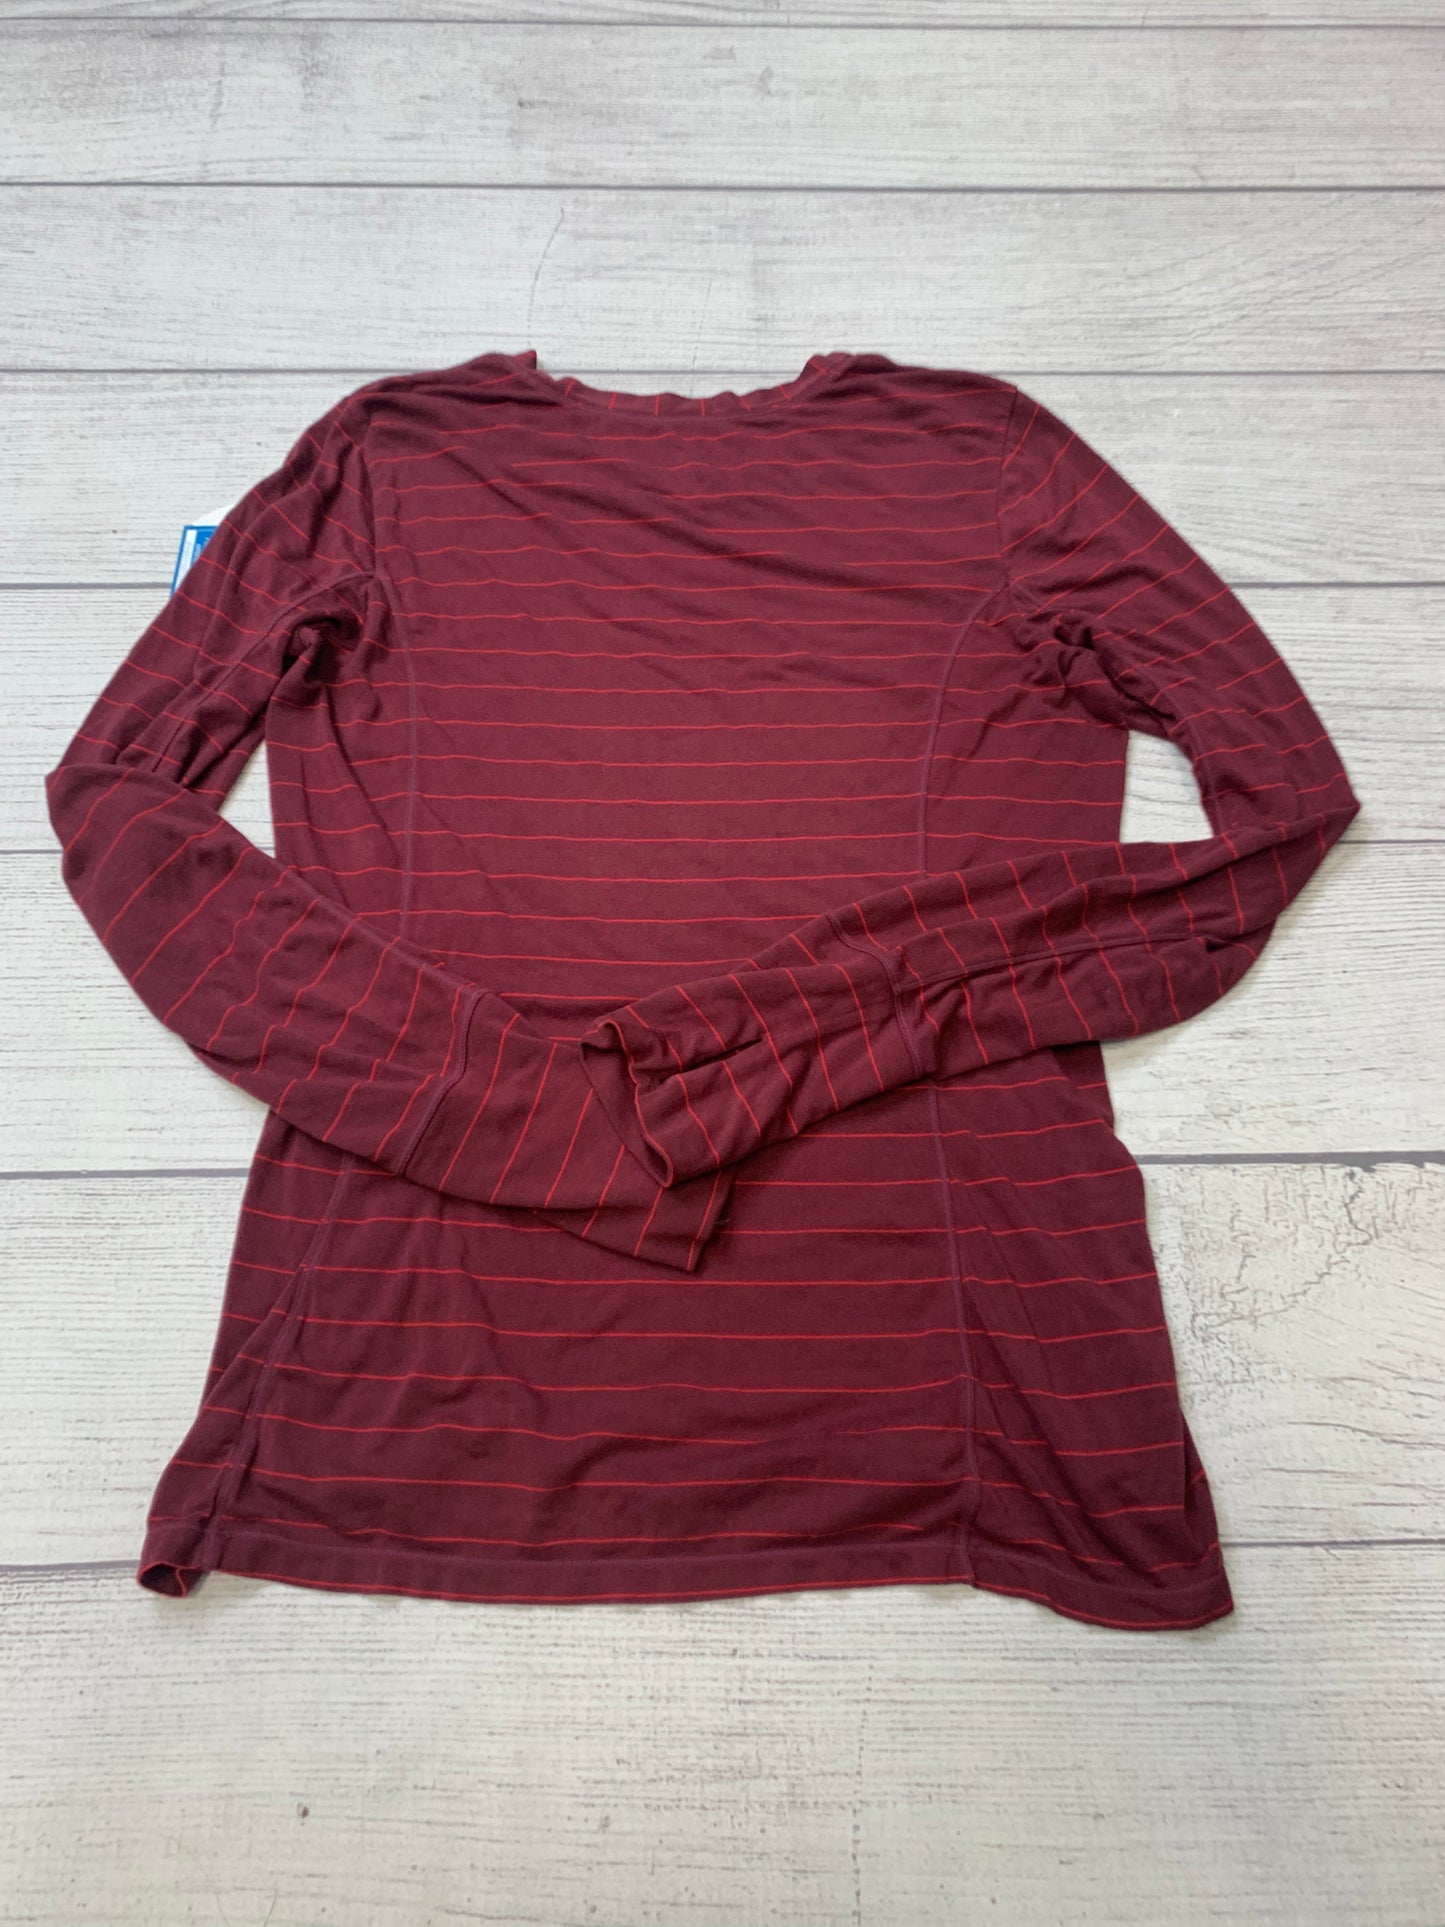 Striped Athletic Top Long Sleeve Collar Athleta, Size M